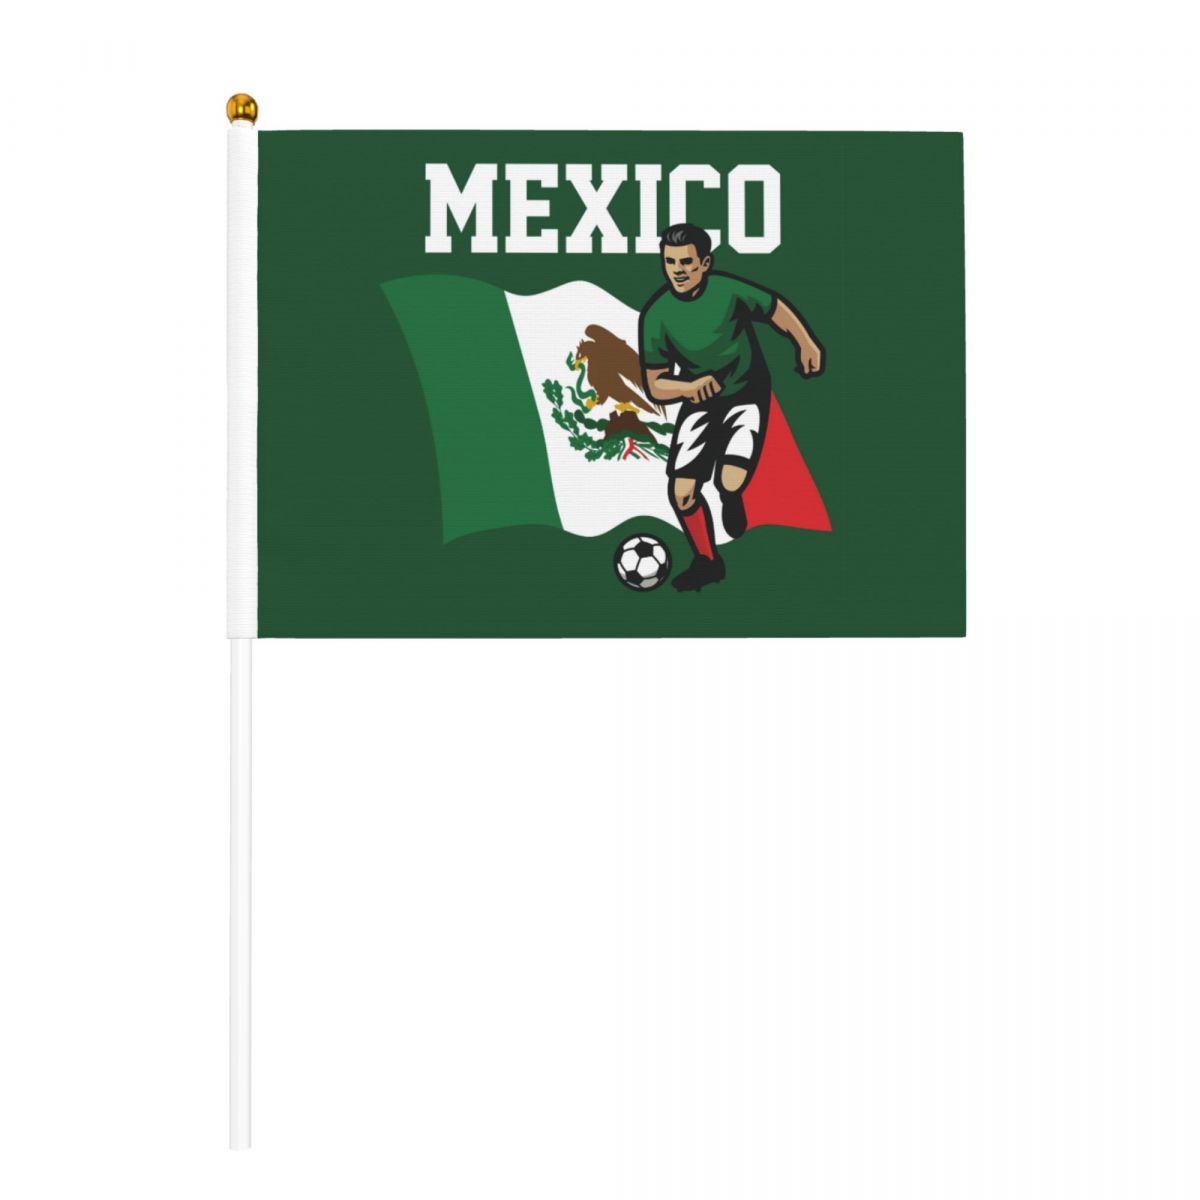 Mexico Soccer Player Hand Held Fade Resistant Mini Flag